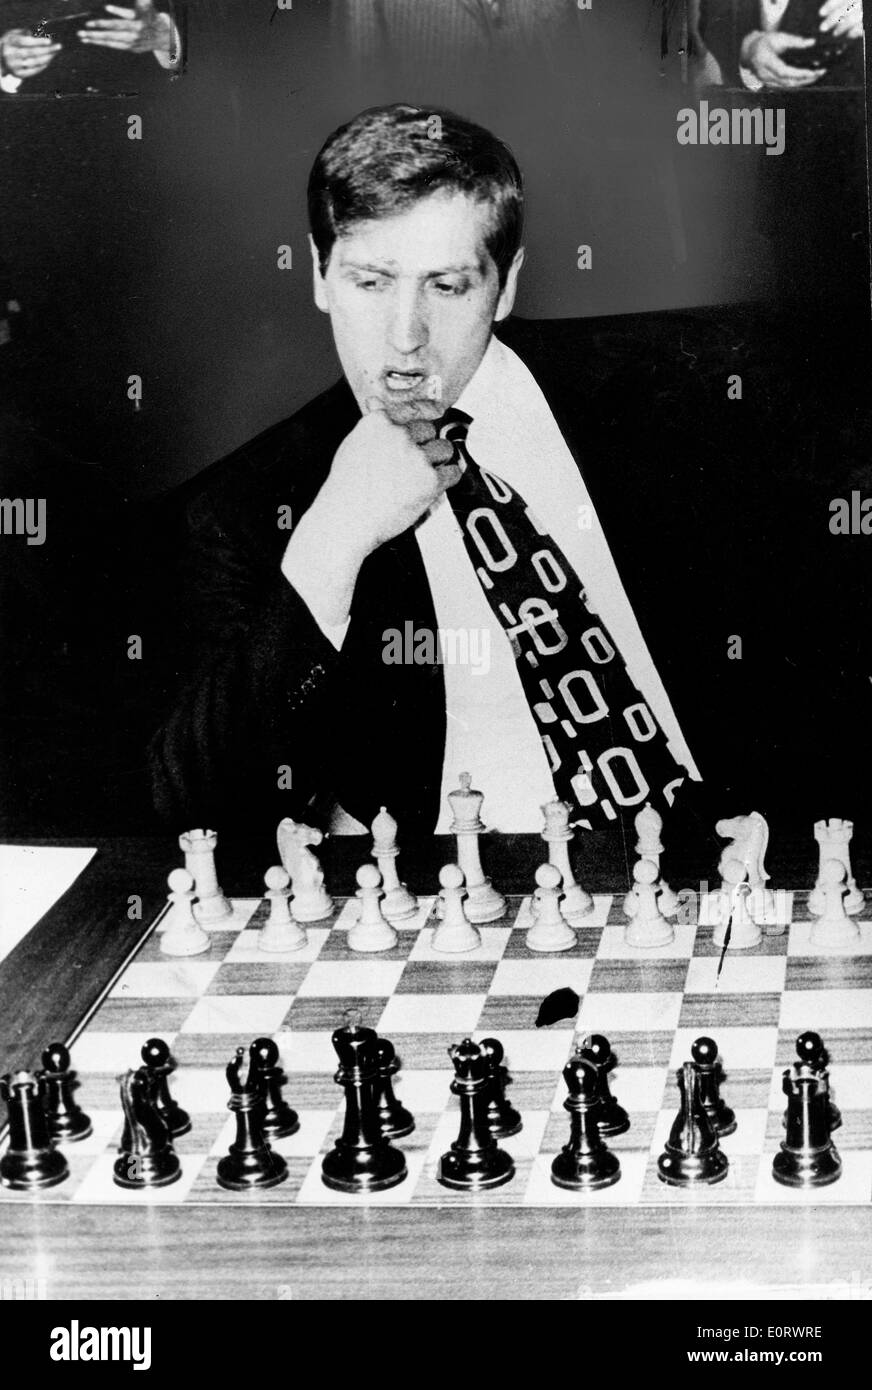 Bobby Fischer at Chess Board with Newspaper Bobby the Champ